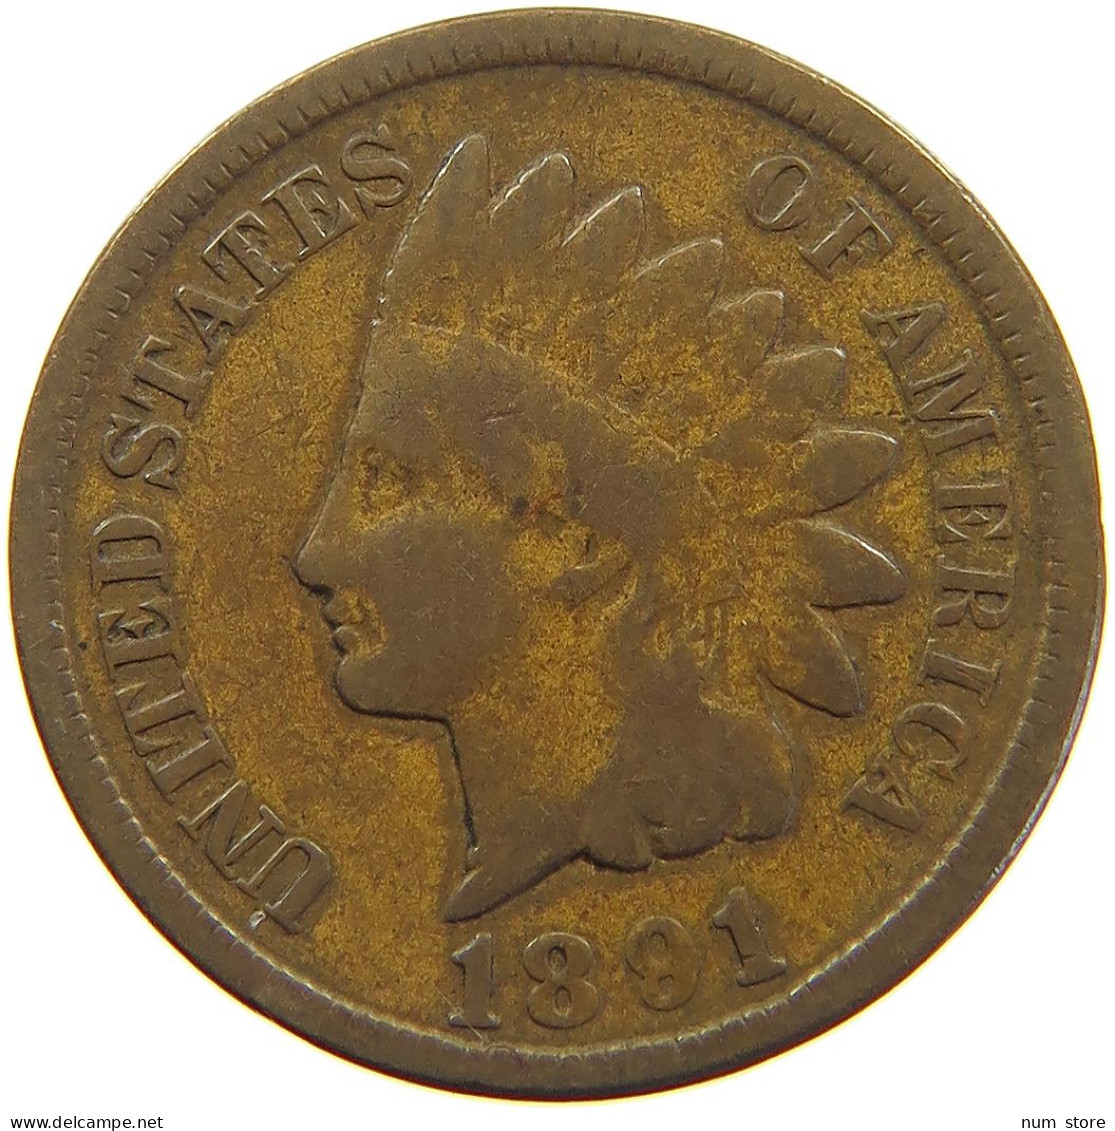 UNITED STATES OF AMERICA CENT 1891 INDIAN HEAD #c083 0633 - 1859-1909: Indian Head